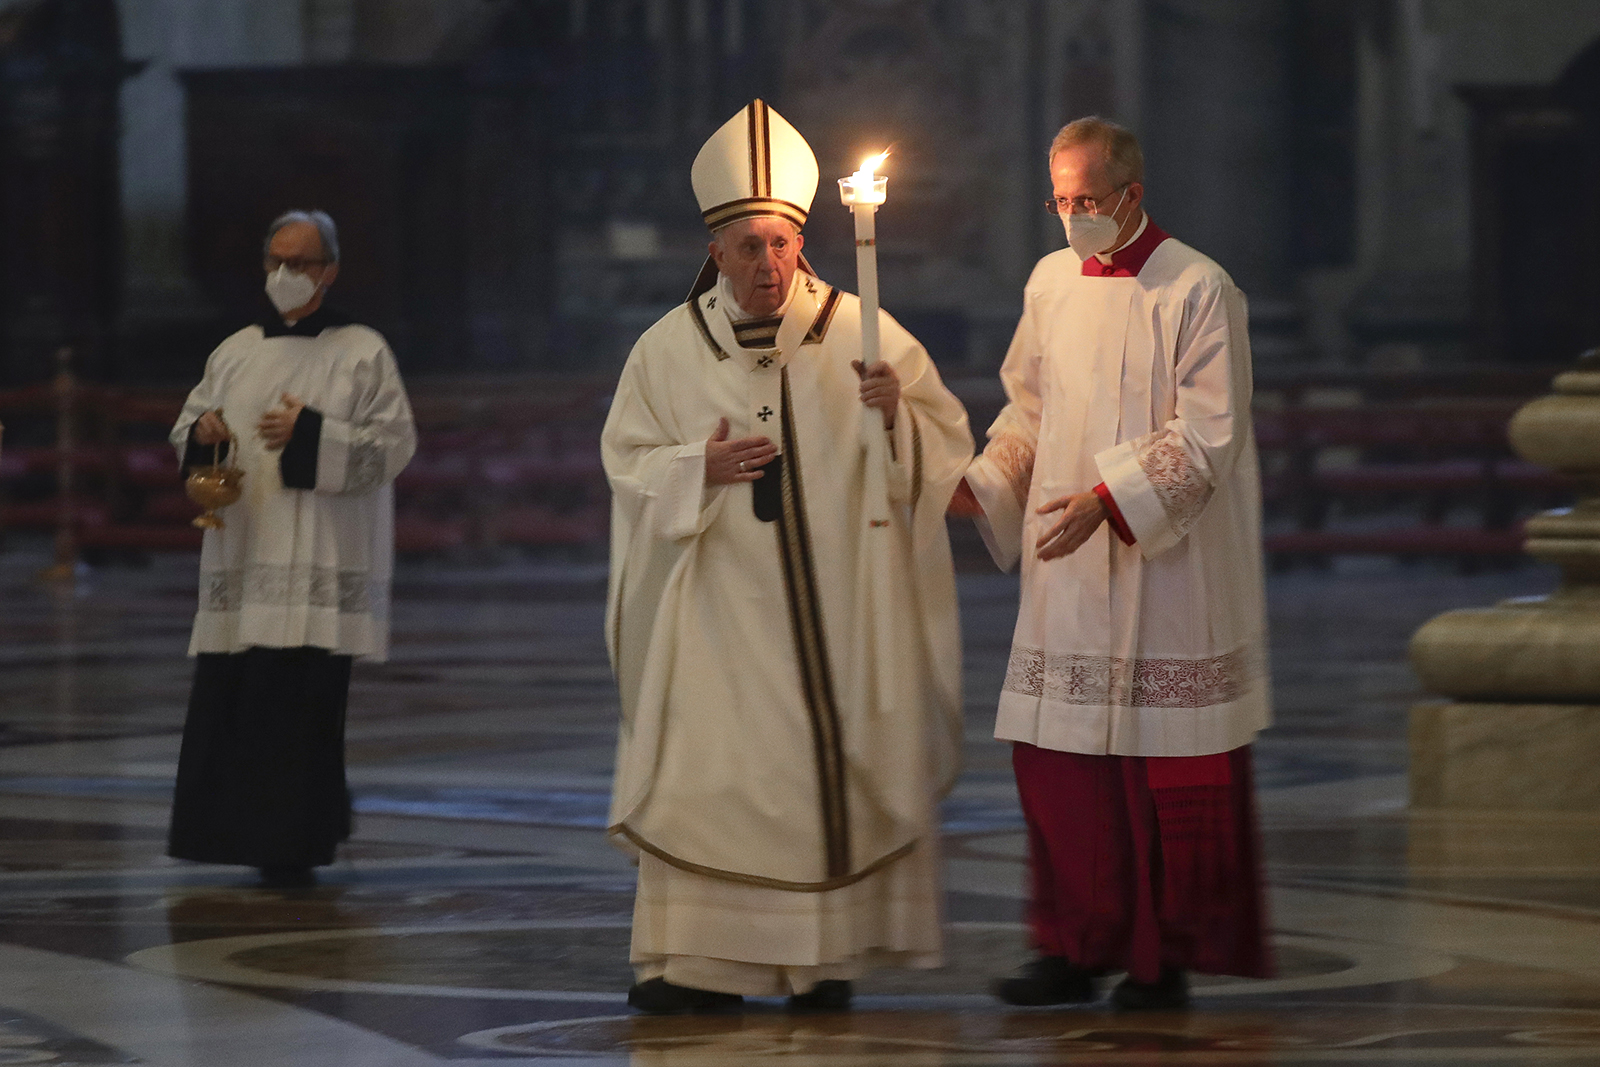 Pope Francis holds a candle as he arrives to celebrate a Mass with members of religious institutions on the occasion of the celebration of the World Day of Consecrated Life, in St. Peter's Basilica at the Vatican, on Feb. 2, 2021. (AP Photo/Andrew Medichini, pool)